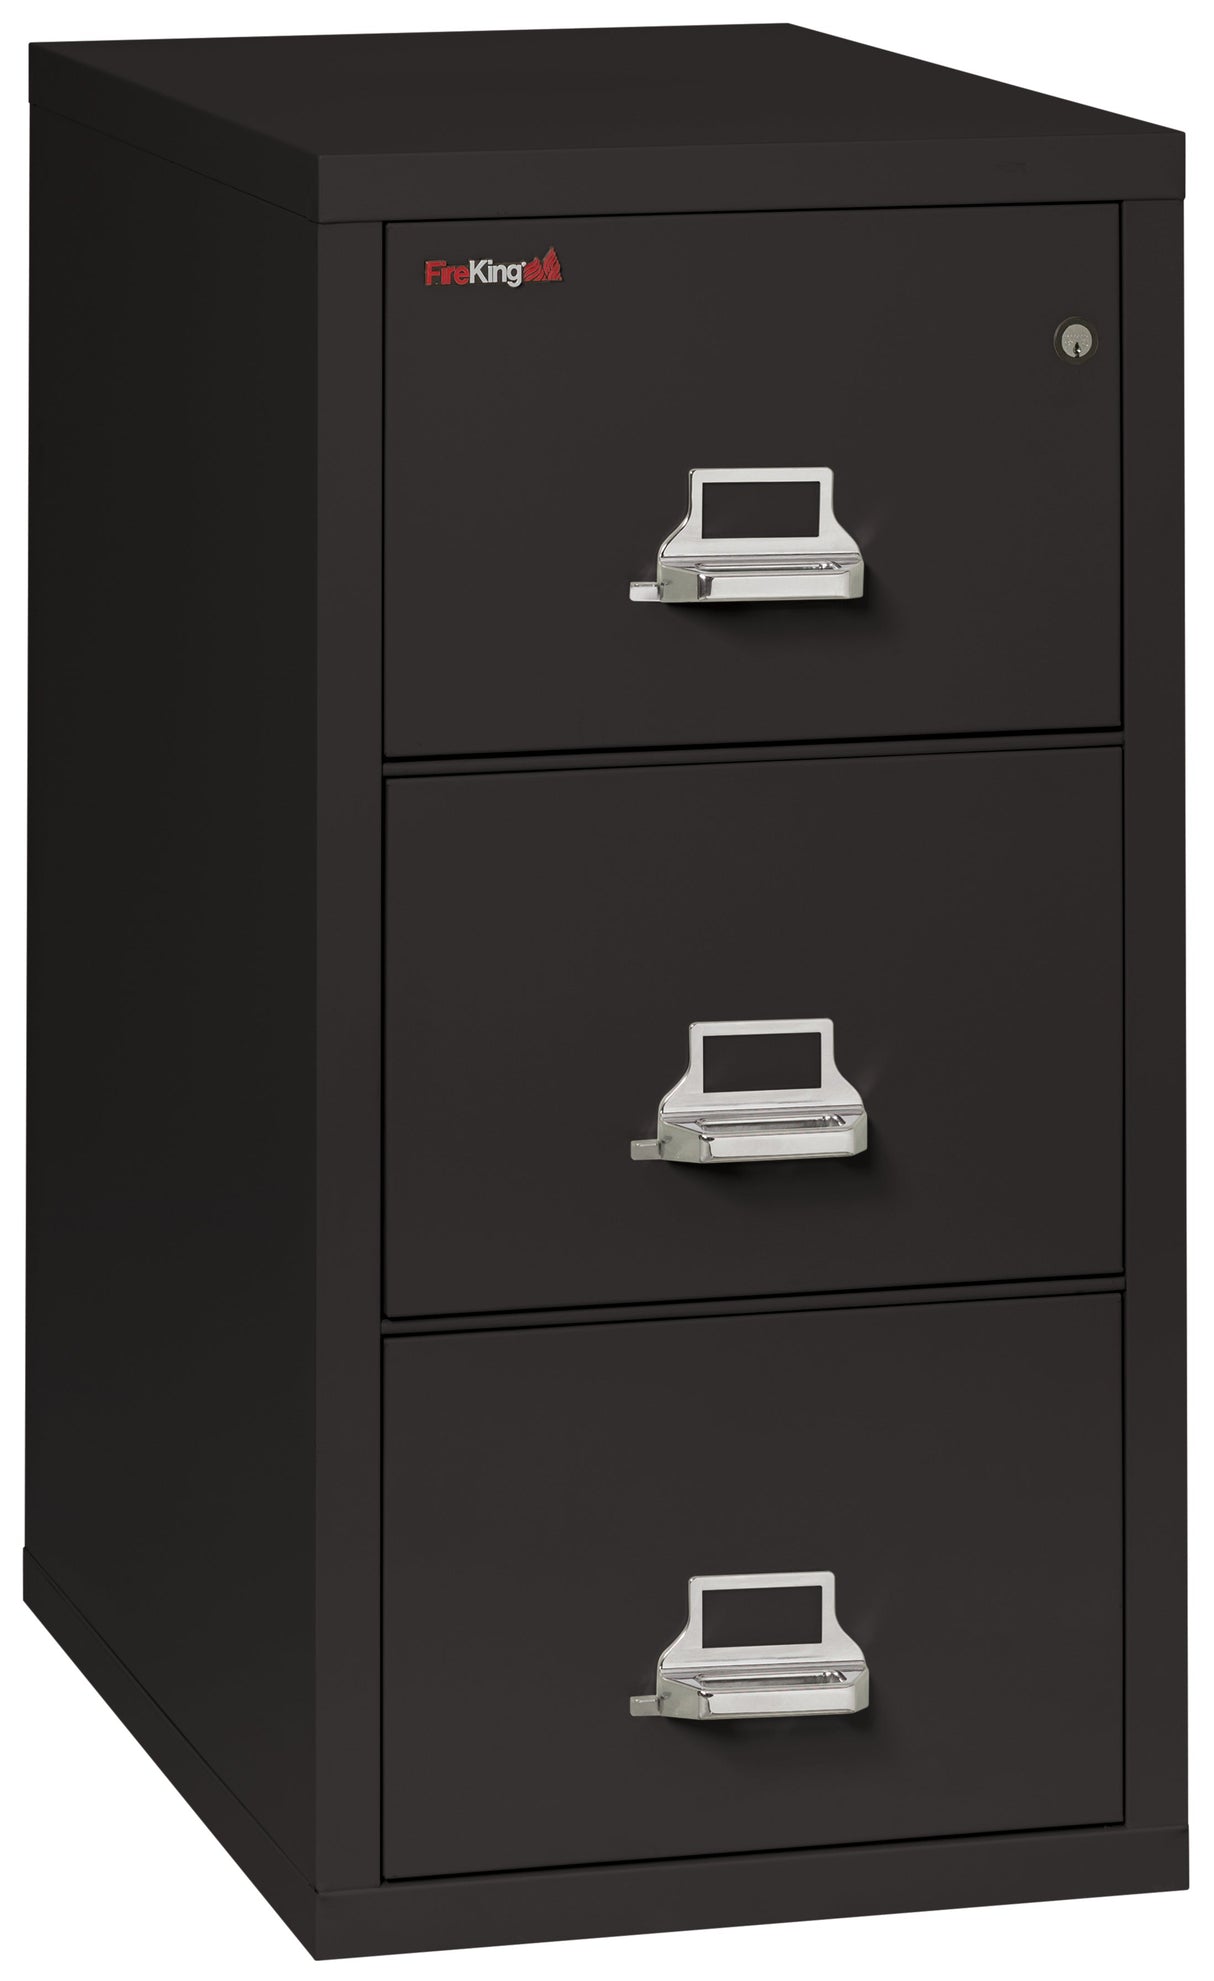 FireKing Classic 31" Vertical File Cabinet (1-Hour Fire-Rated & High Security)